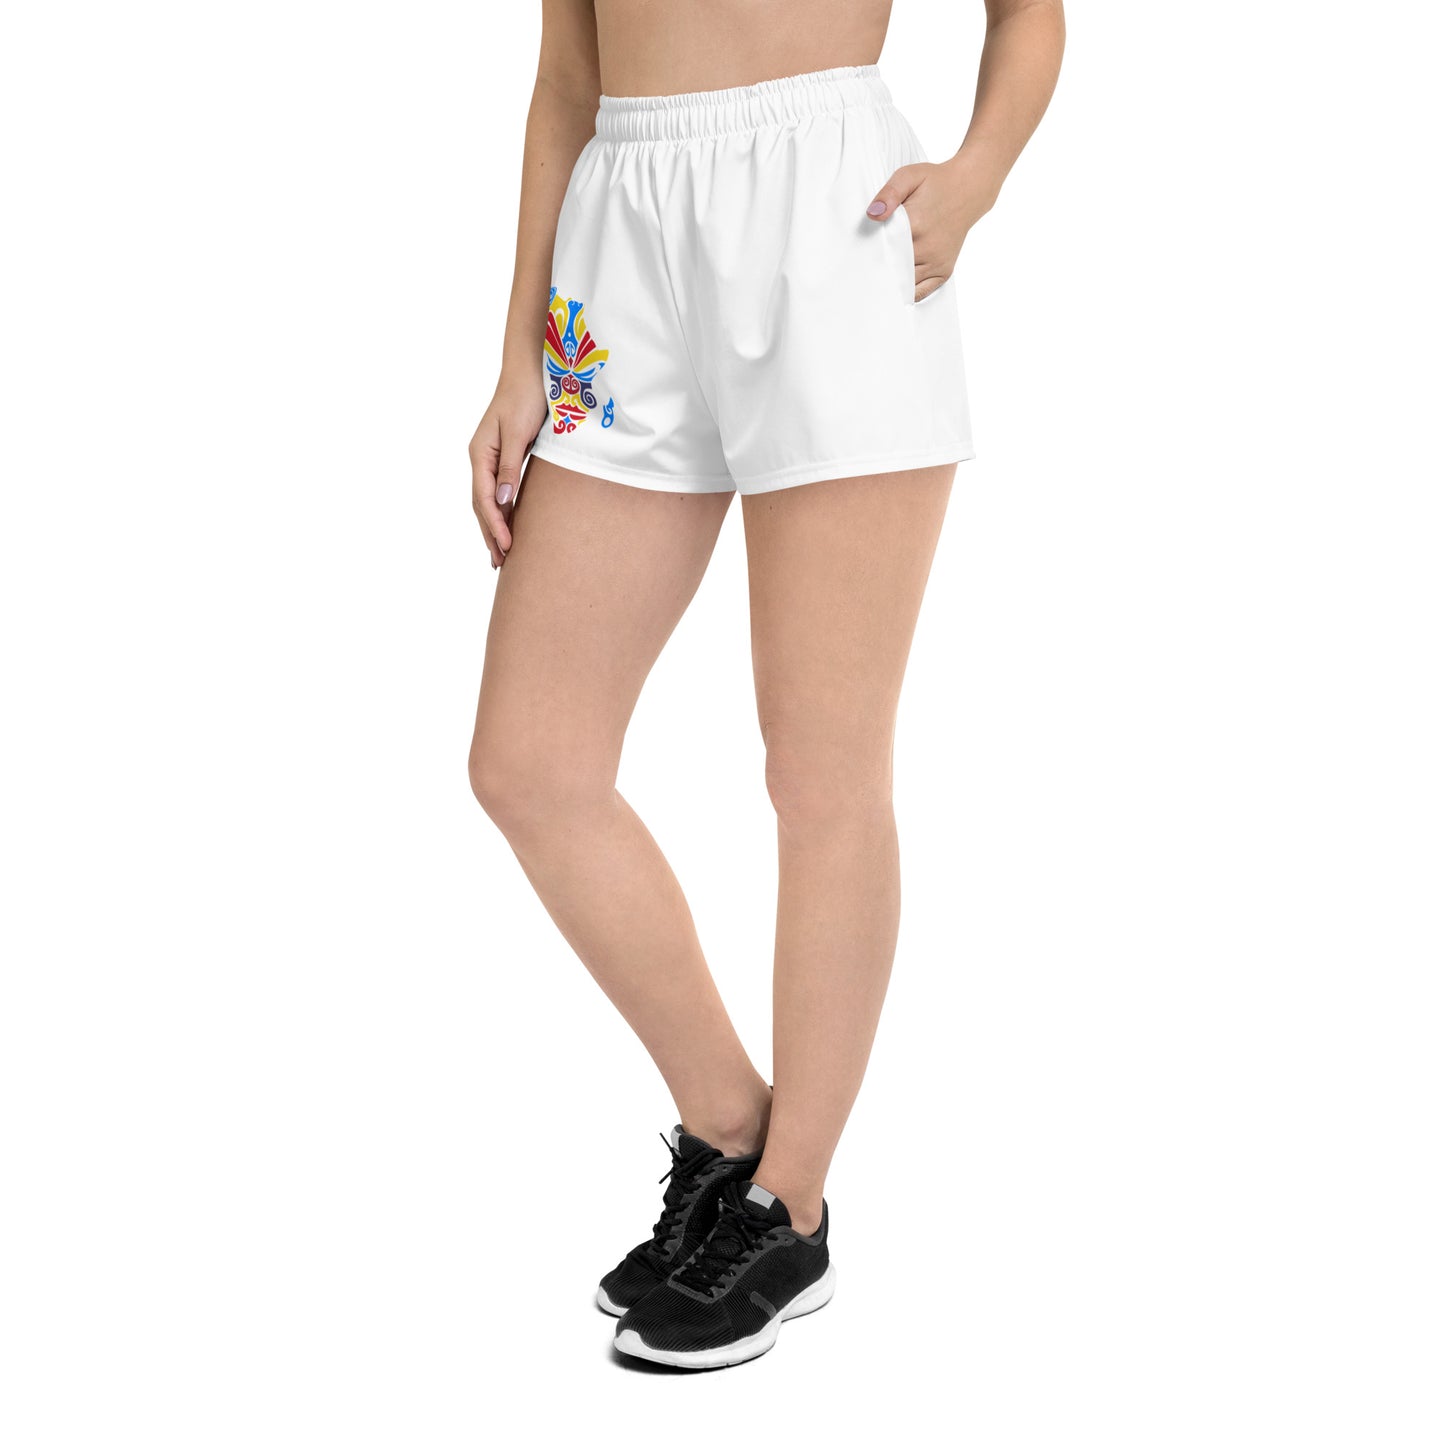 Women's Athletic Short Shorts - Banamerica Collection